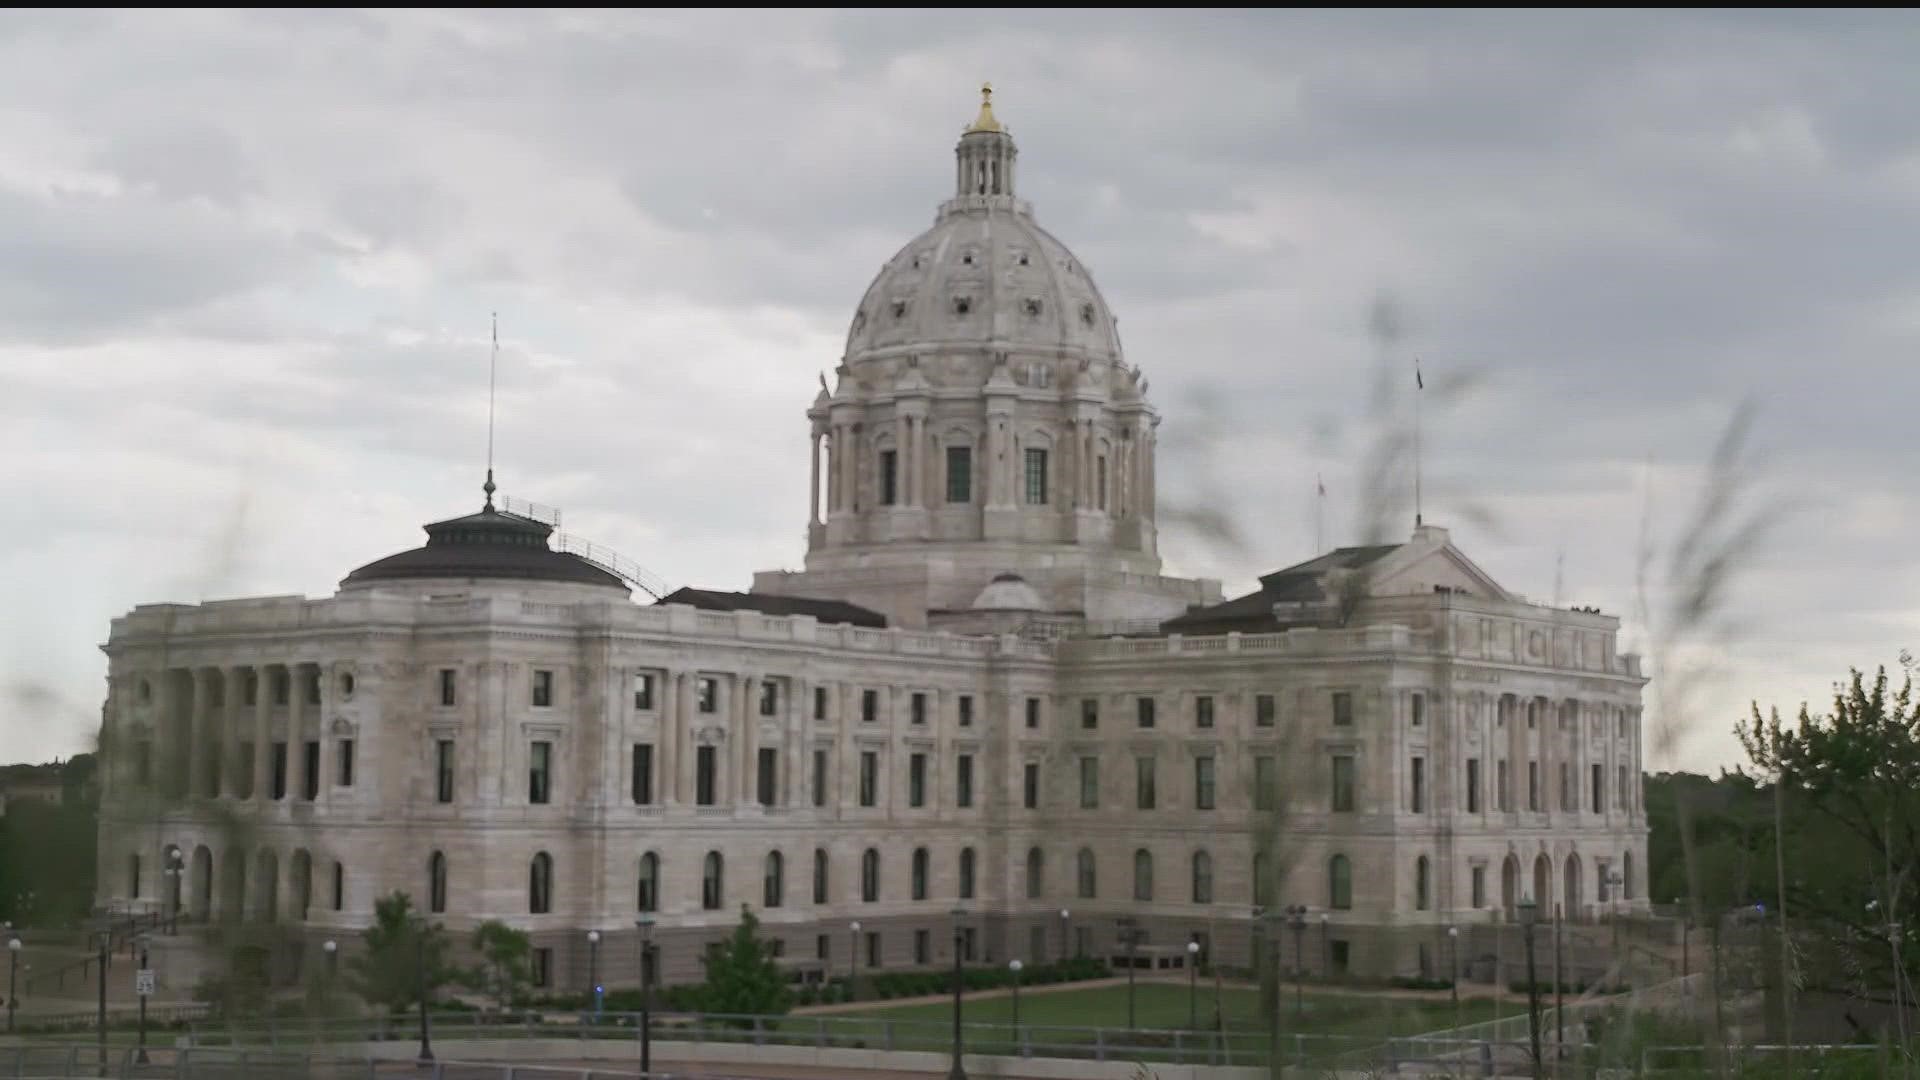 Time is running out for Minnesota lawmakers to address some big issues before the session ends, but debate continues between the state's divided legislature.